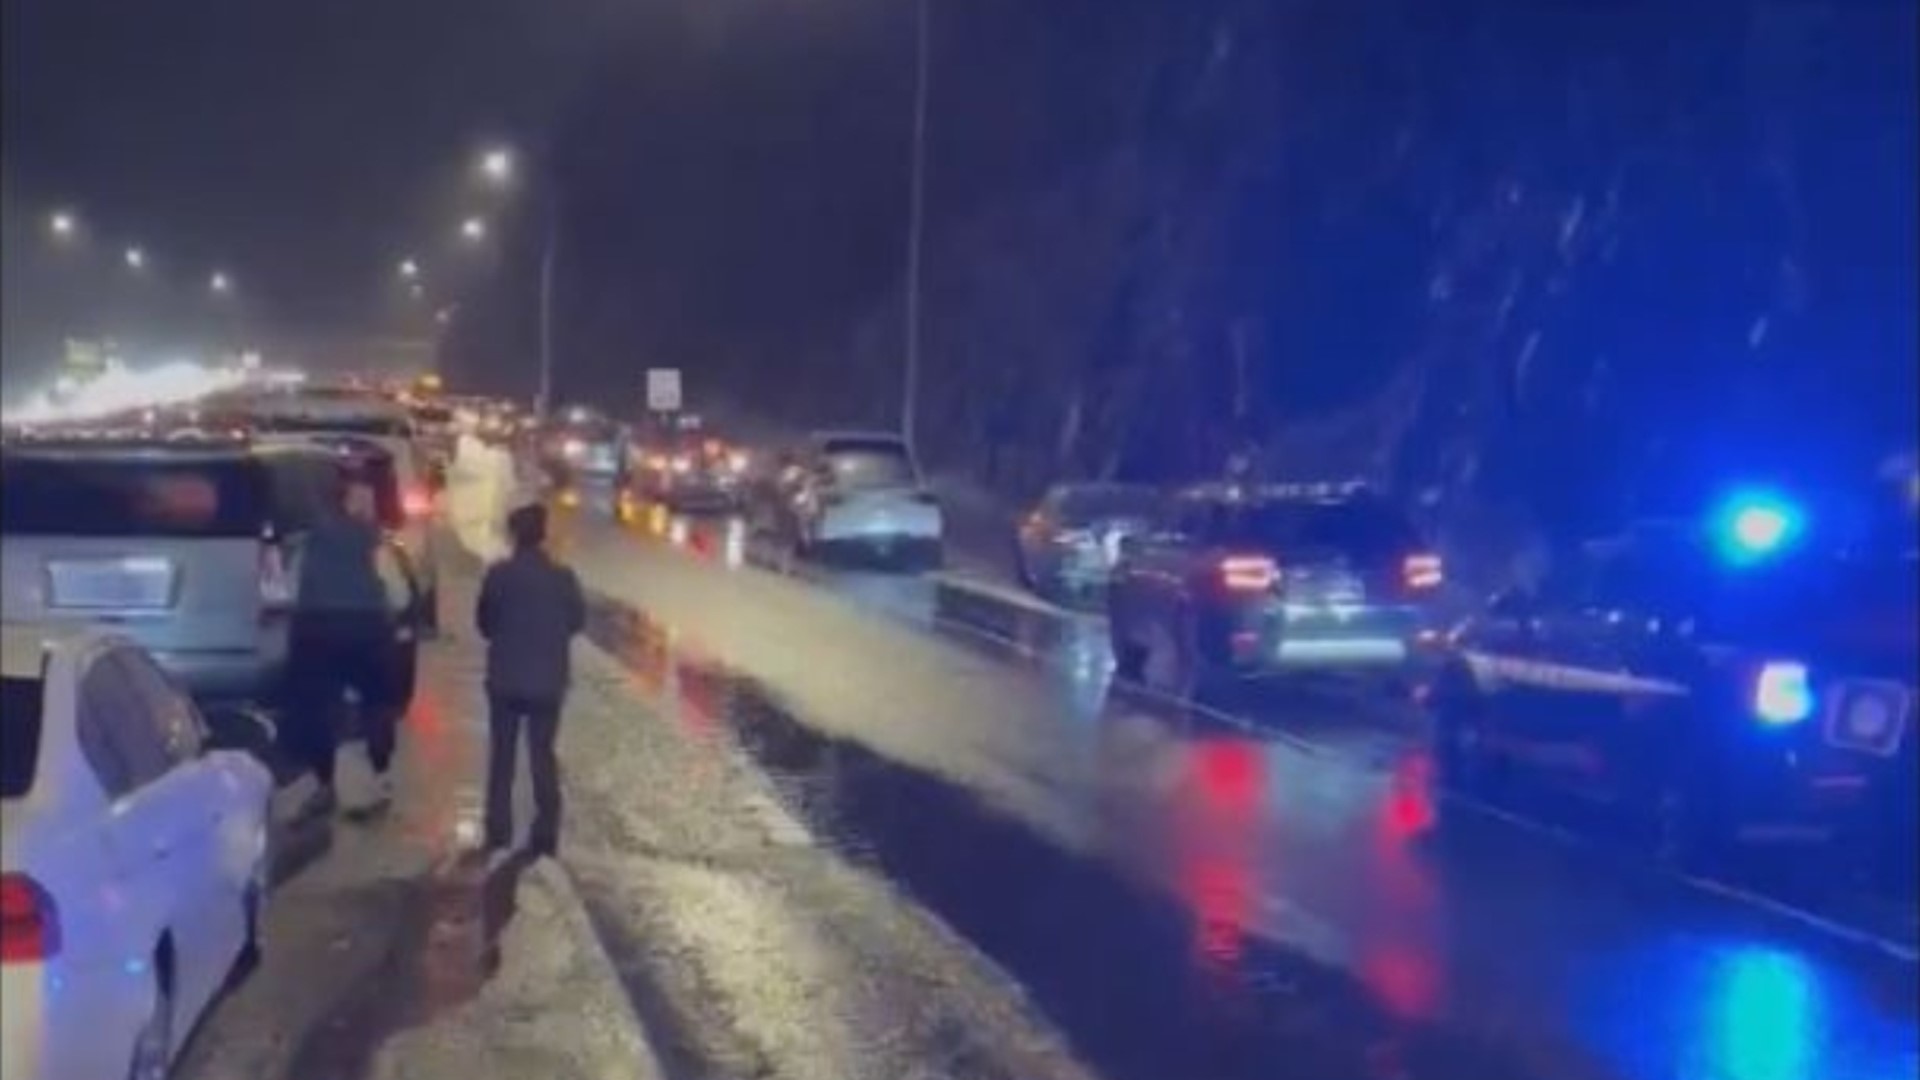 Video shared by KGW viewer Jesse Rubalcava shows multiple cars pulled over on I-205 in the West Linn area. ODOT says around 40 cars may have been damaged.